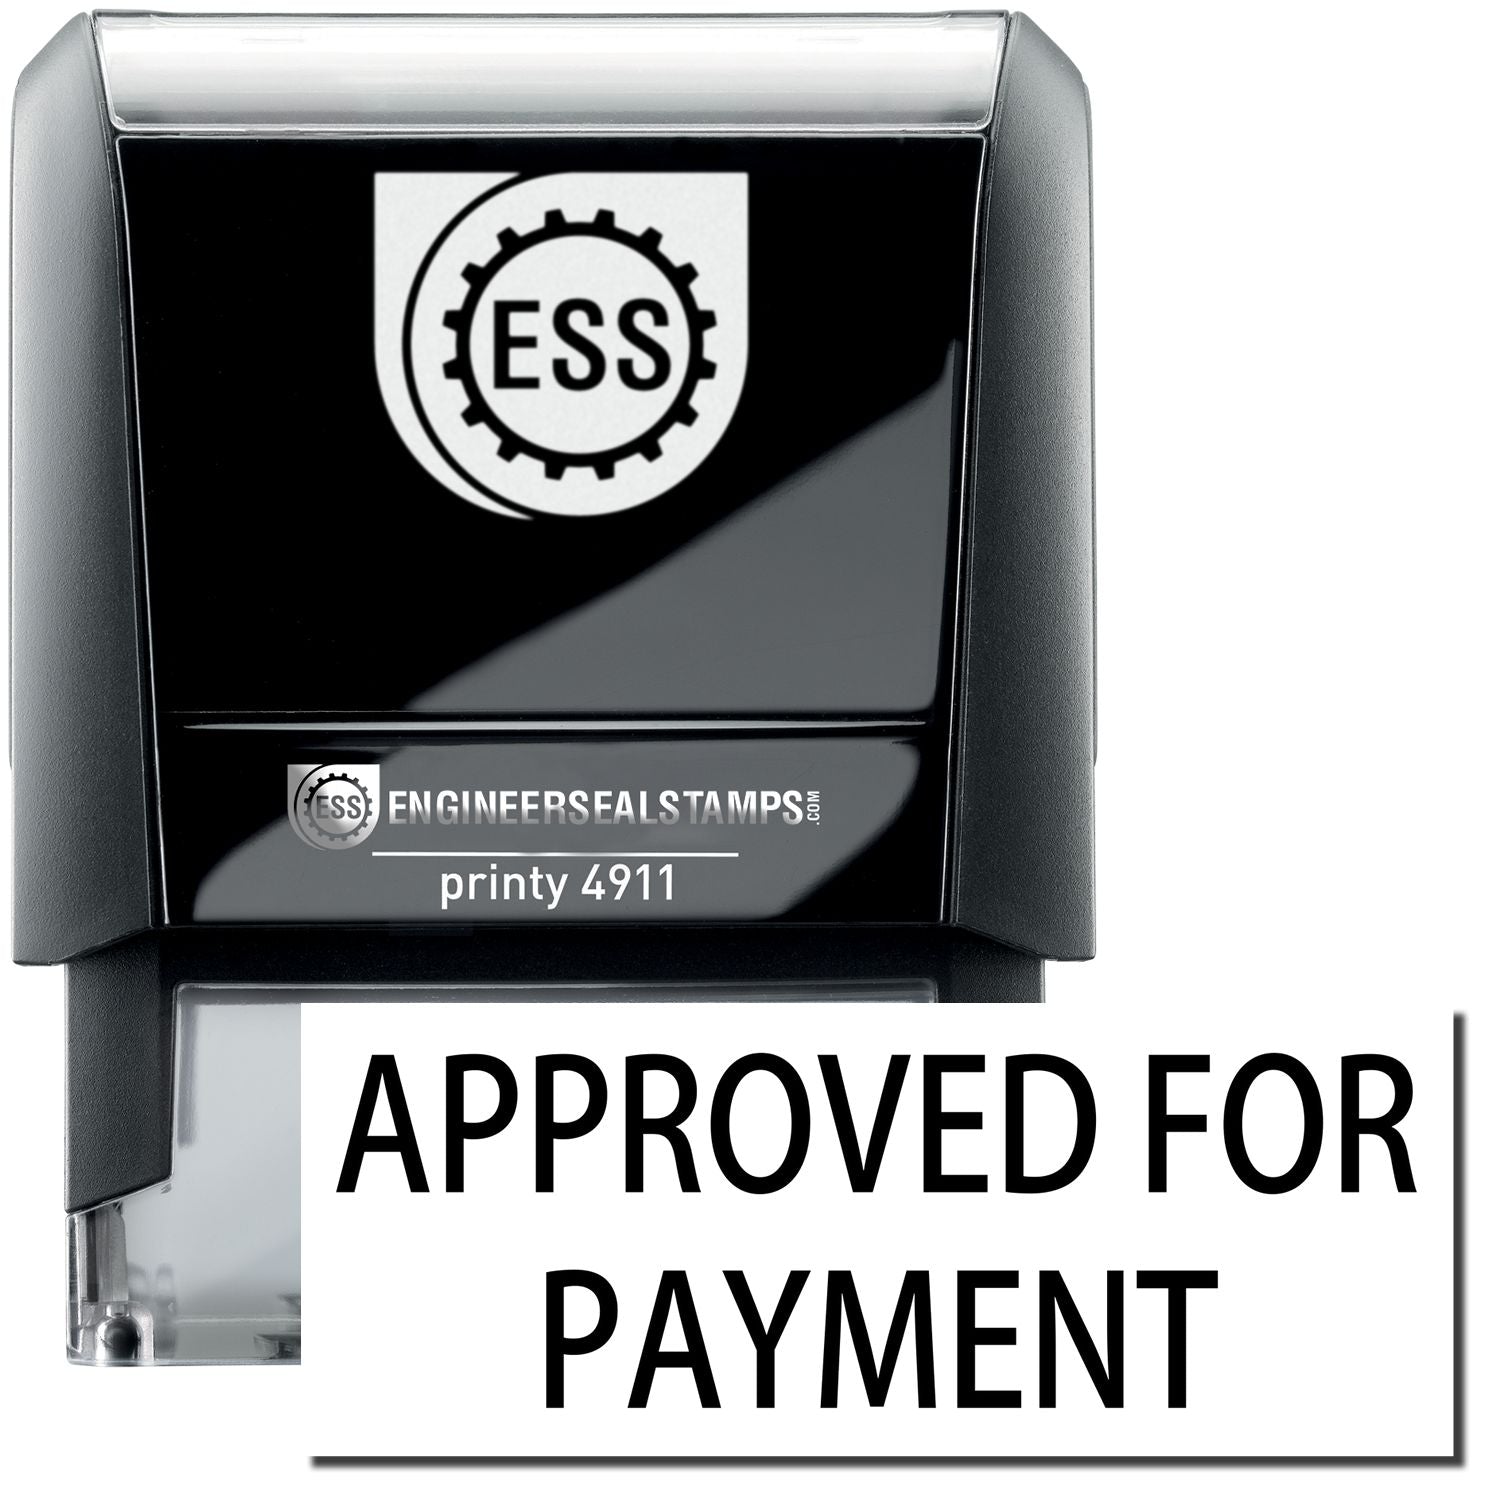 A self-inking stamp with a stamped image showing how the text "APPROVED FOR PAYMENT" is displayed after stamping.